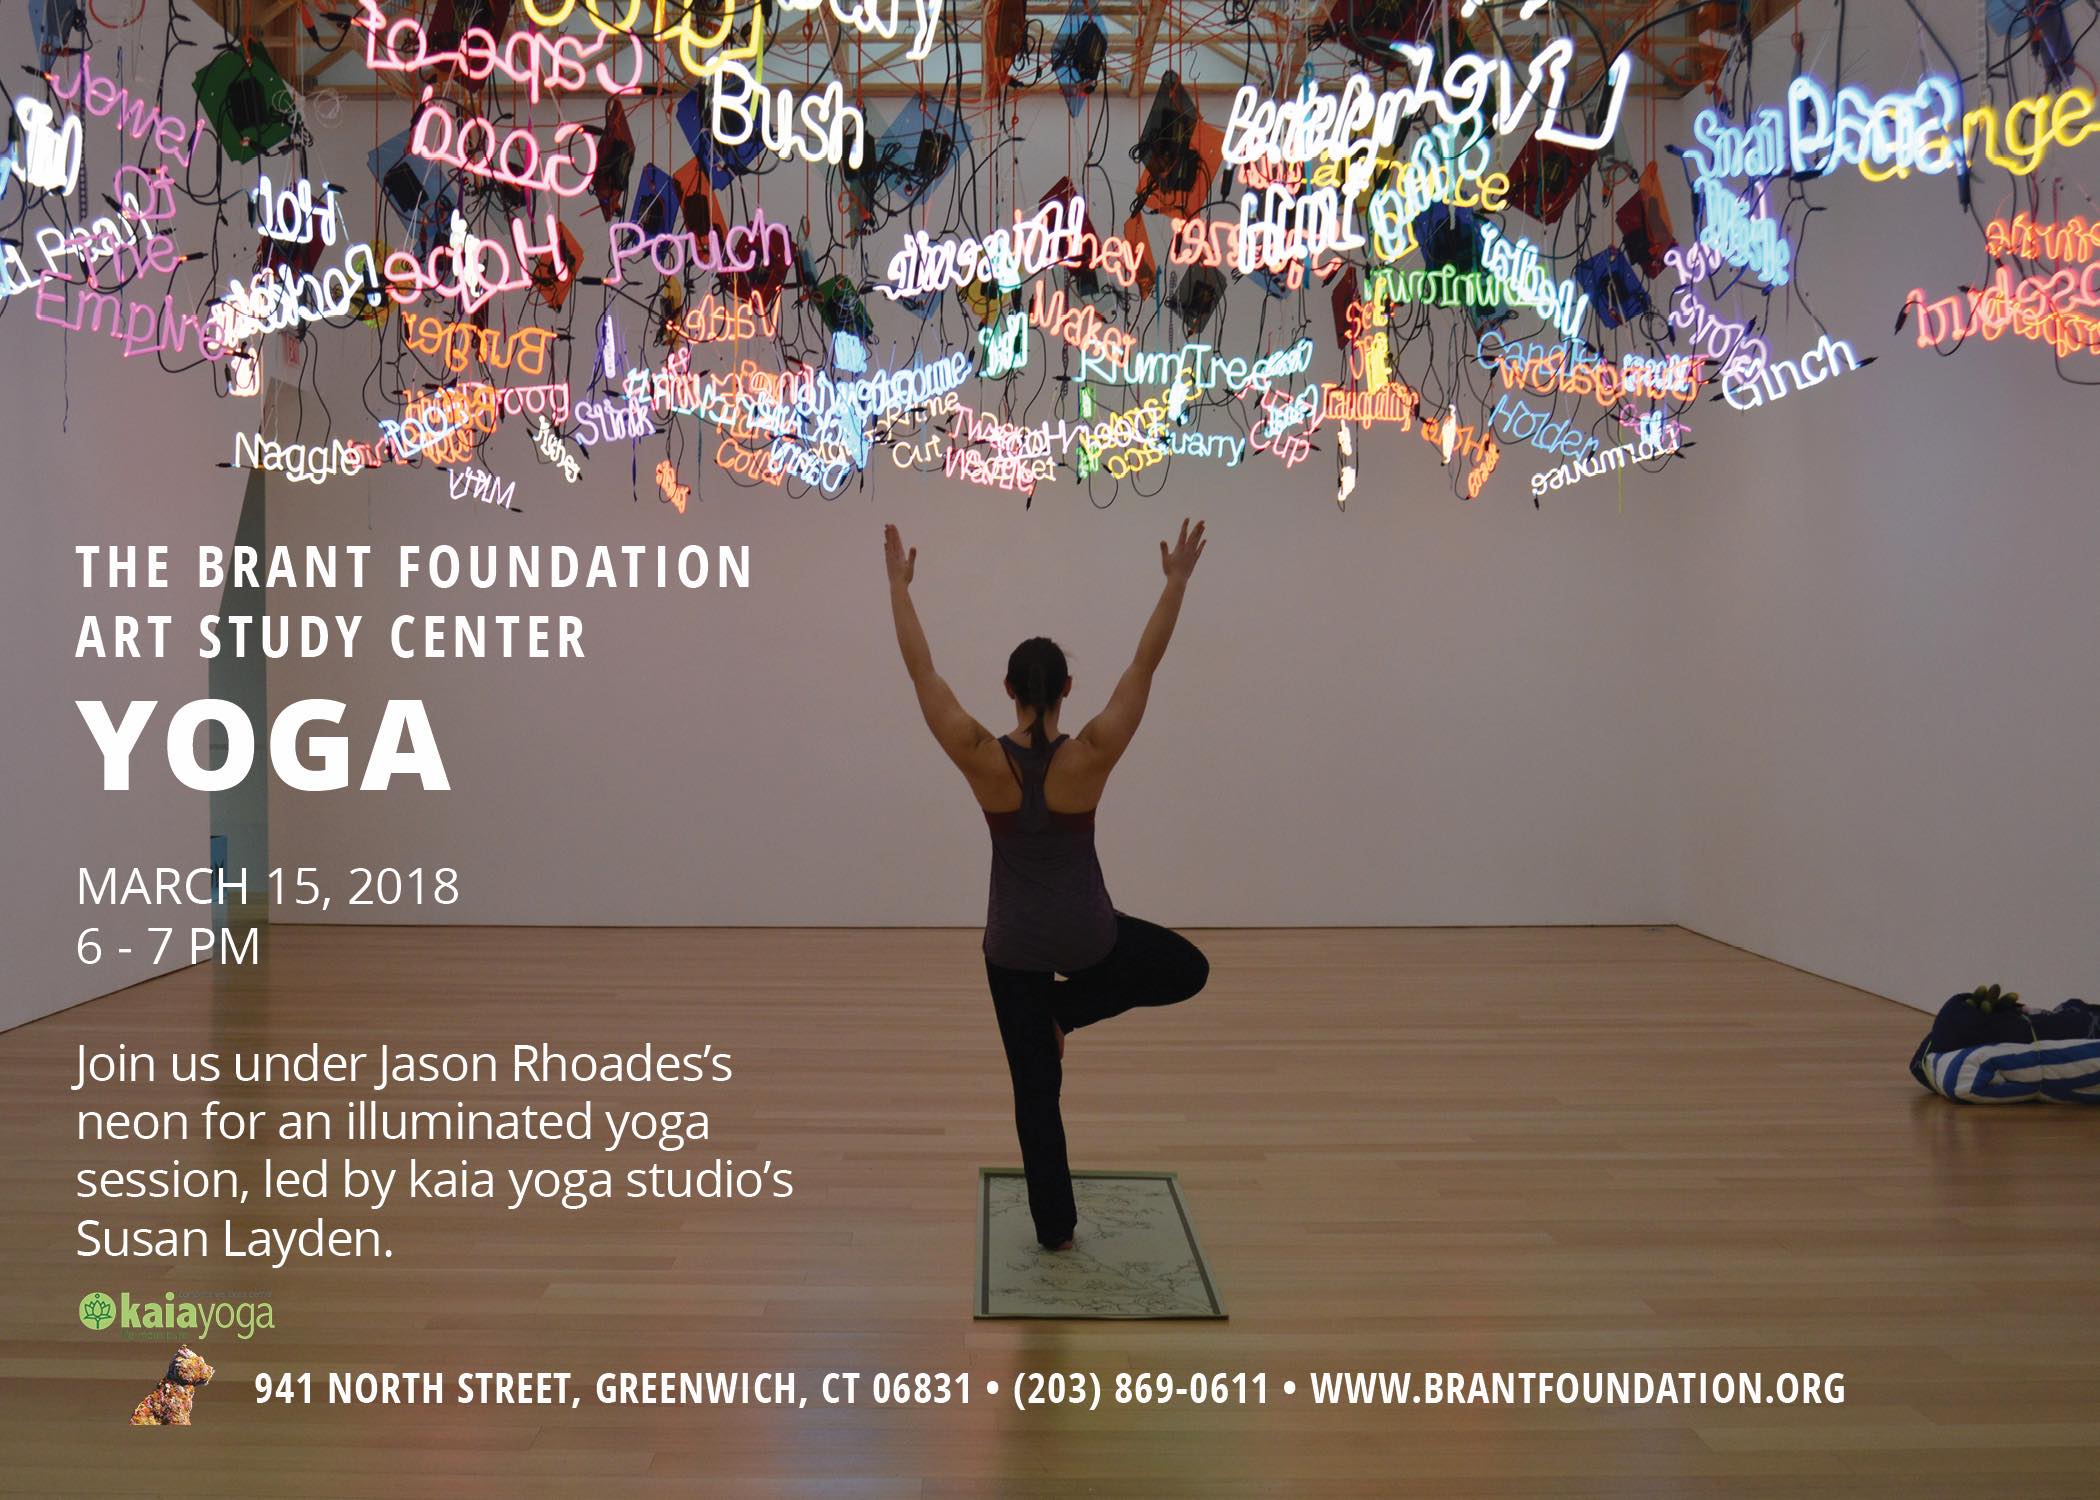 Yoga at The Brant Foundation